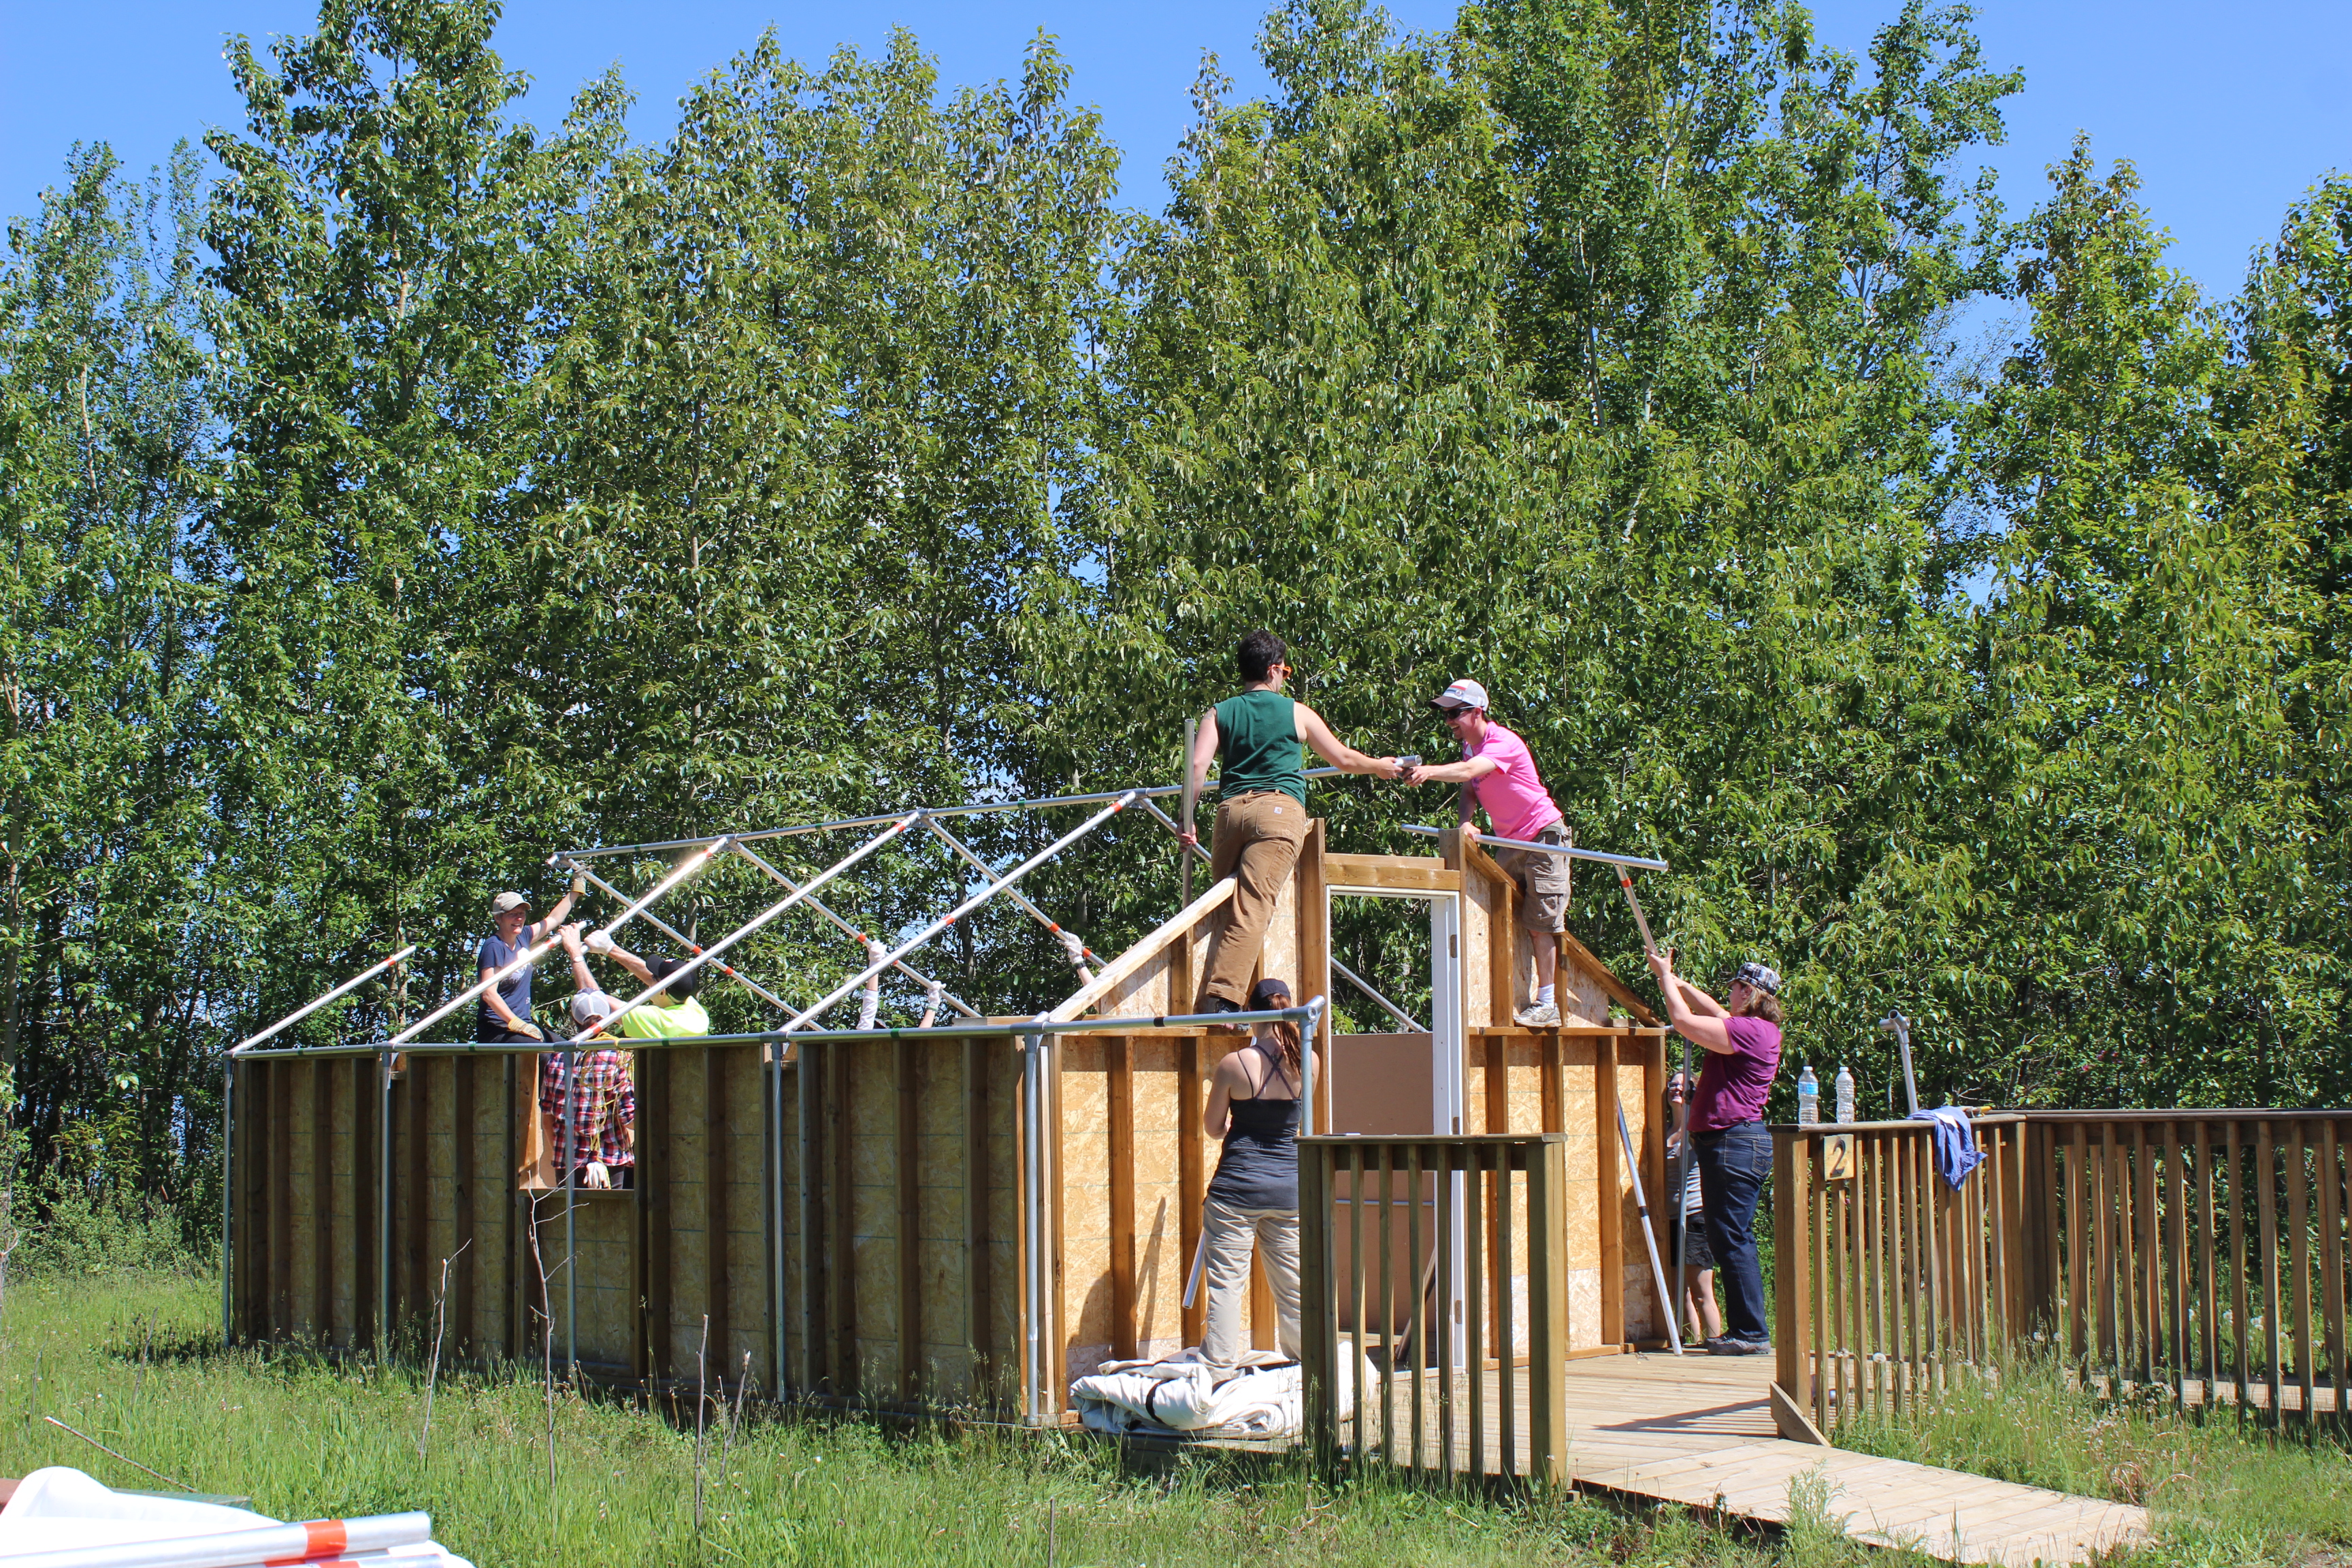 Augustana Miquelon Lake Research Station Day of Service